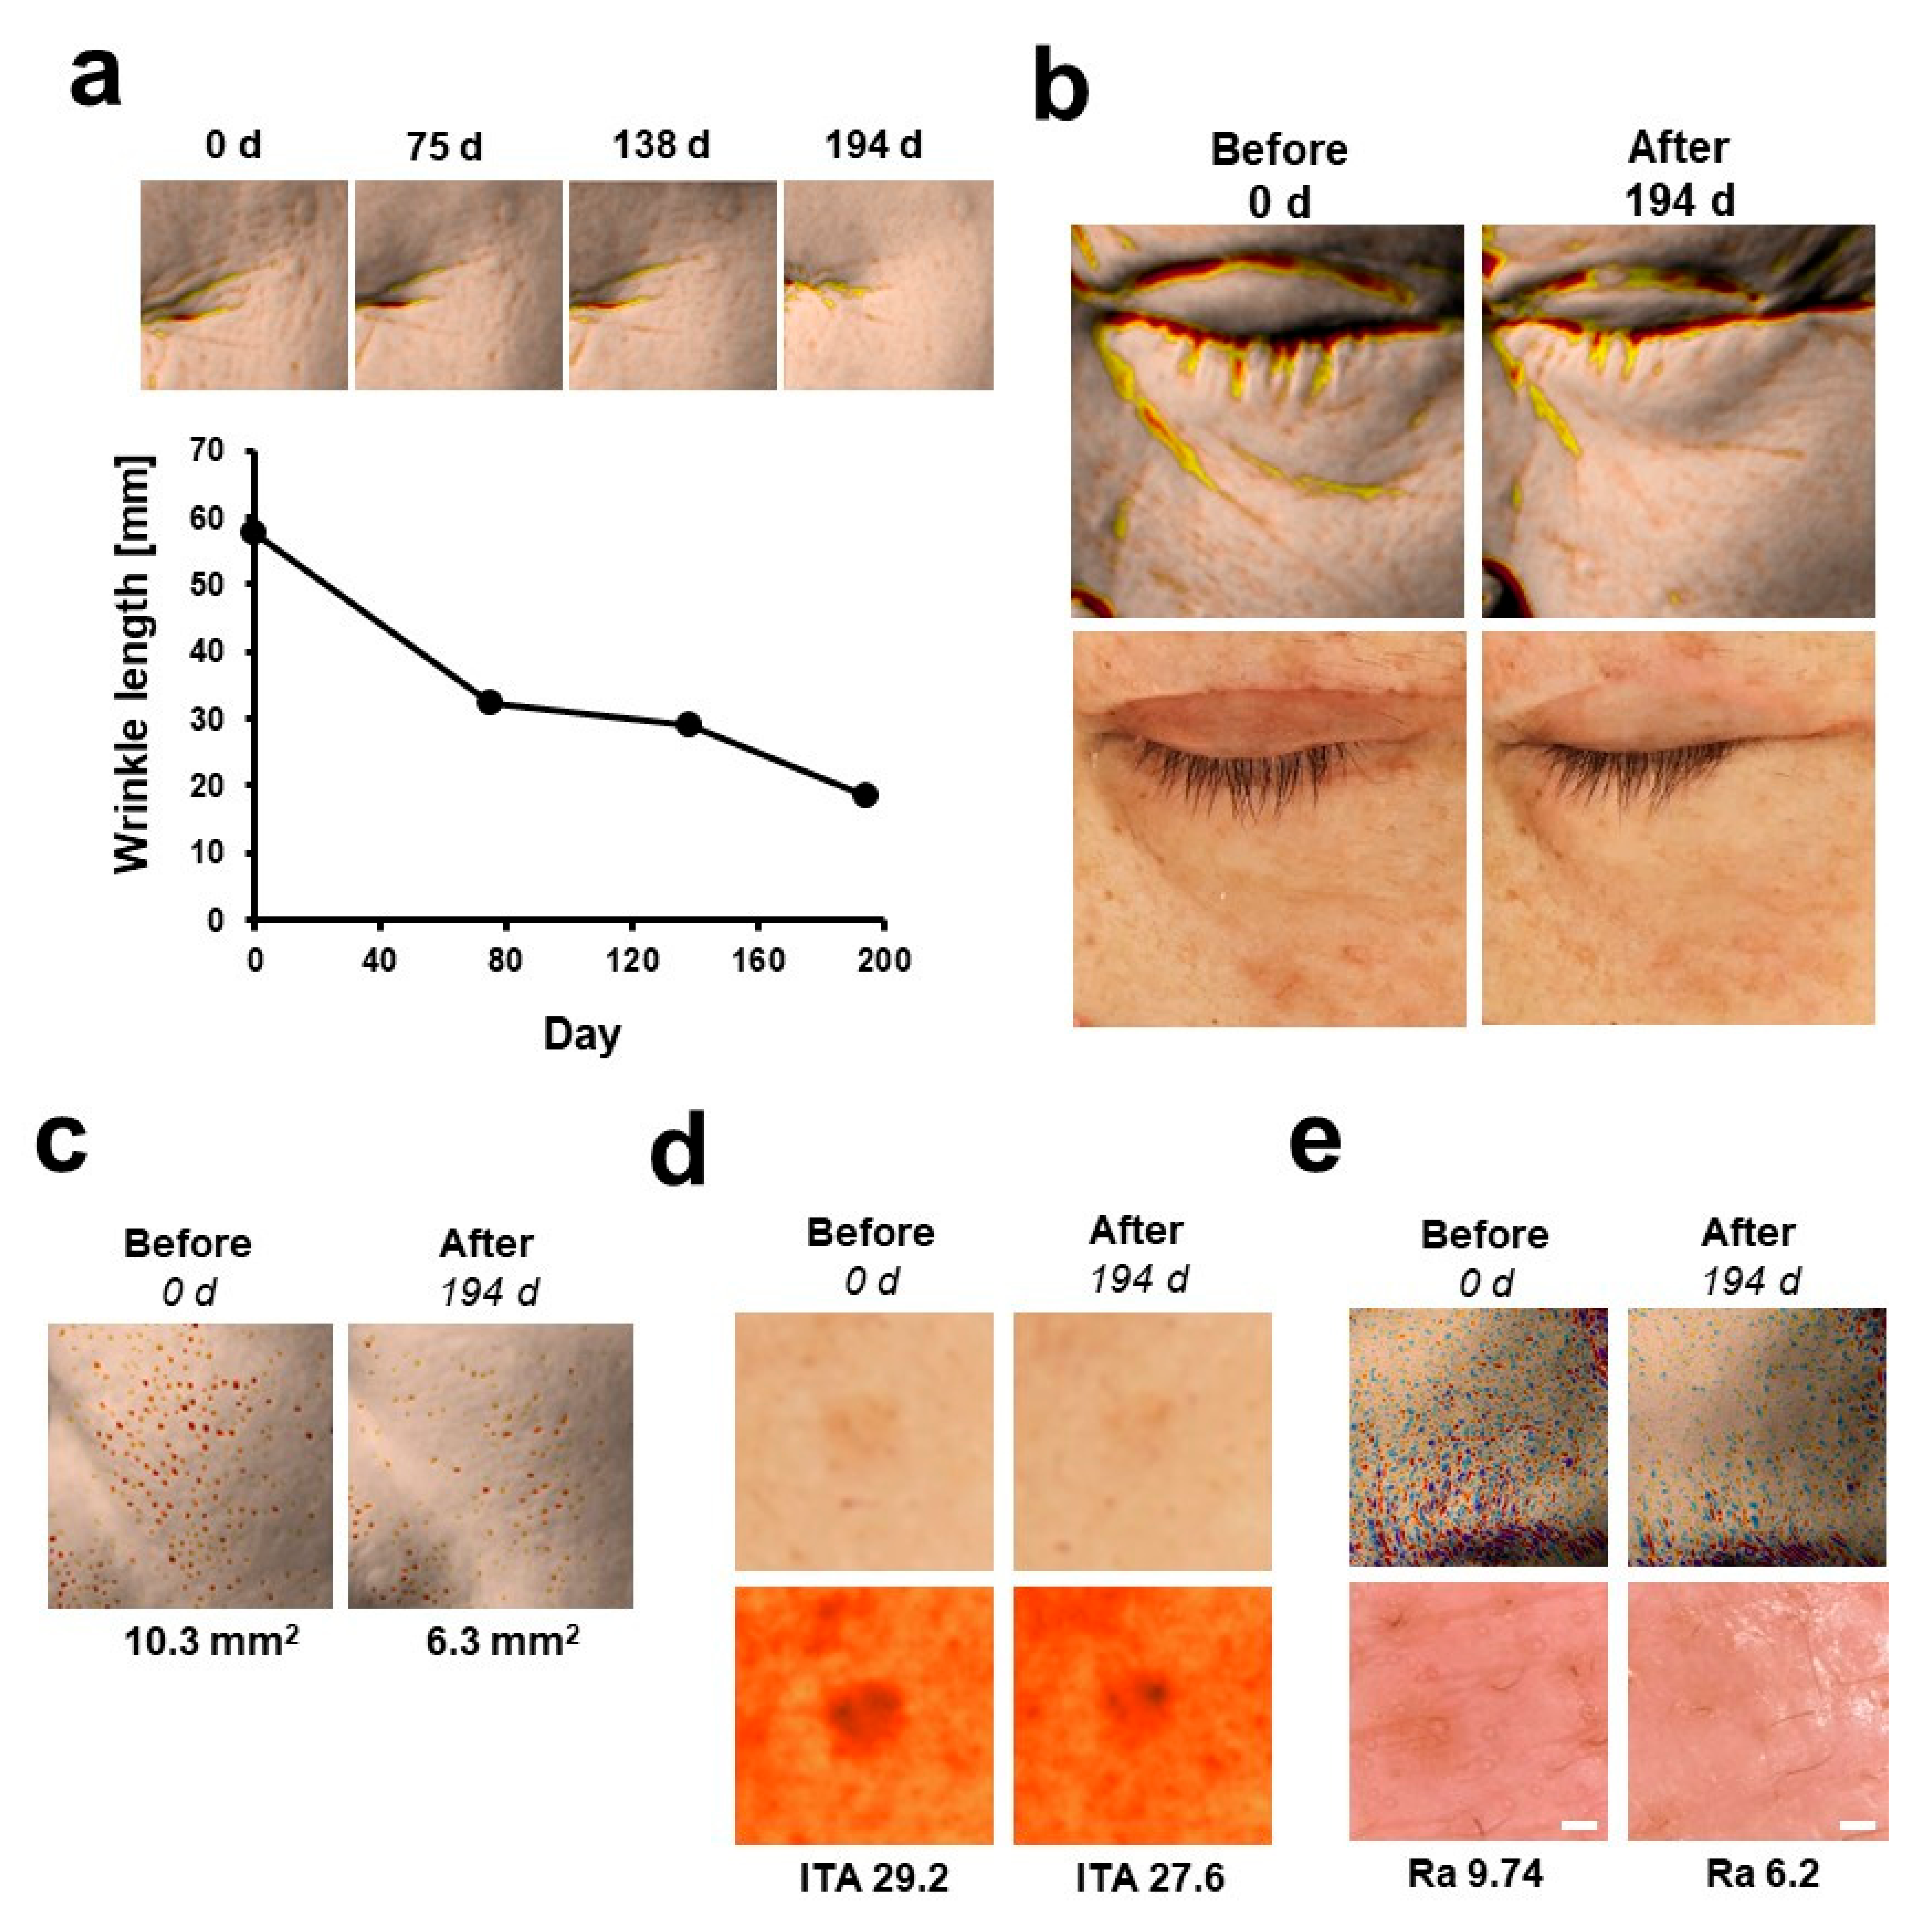 Pharmaceutics | Free Full-Text | Enhancement of Efficacy of Retinoids  through Enhancing Retinoid-Induced RAR Activity and Inhibiting  Hydroxylation of Retinoic Acid, and Its Clinical Efficacy on Photo-Aging